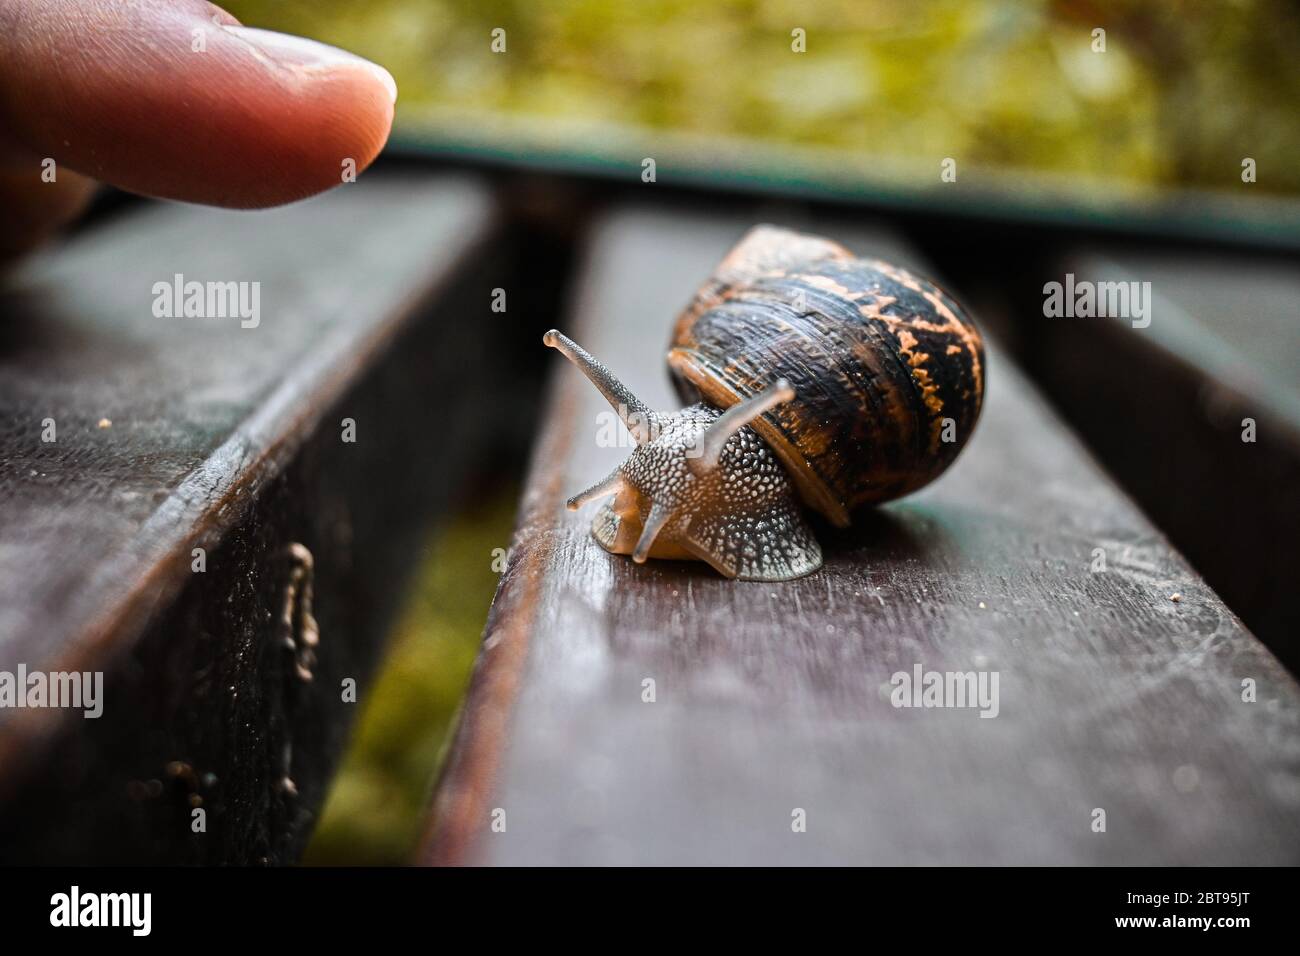 Colorful Snail on a bench, a human finger is about to touch it Stock Photo